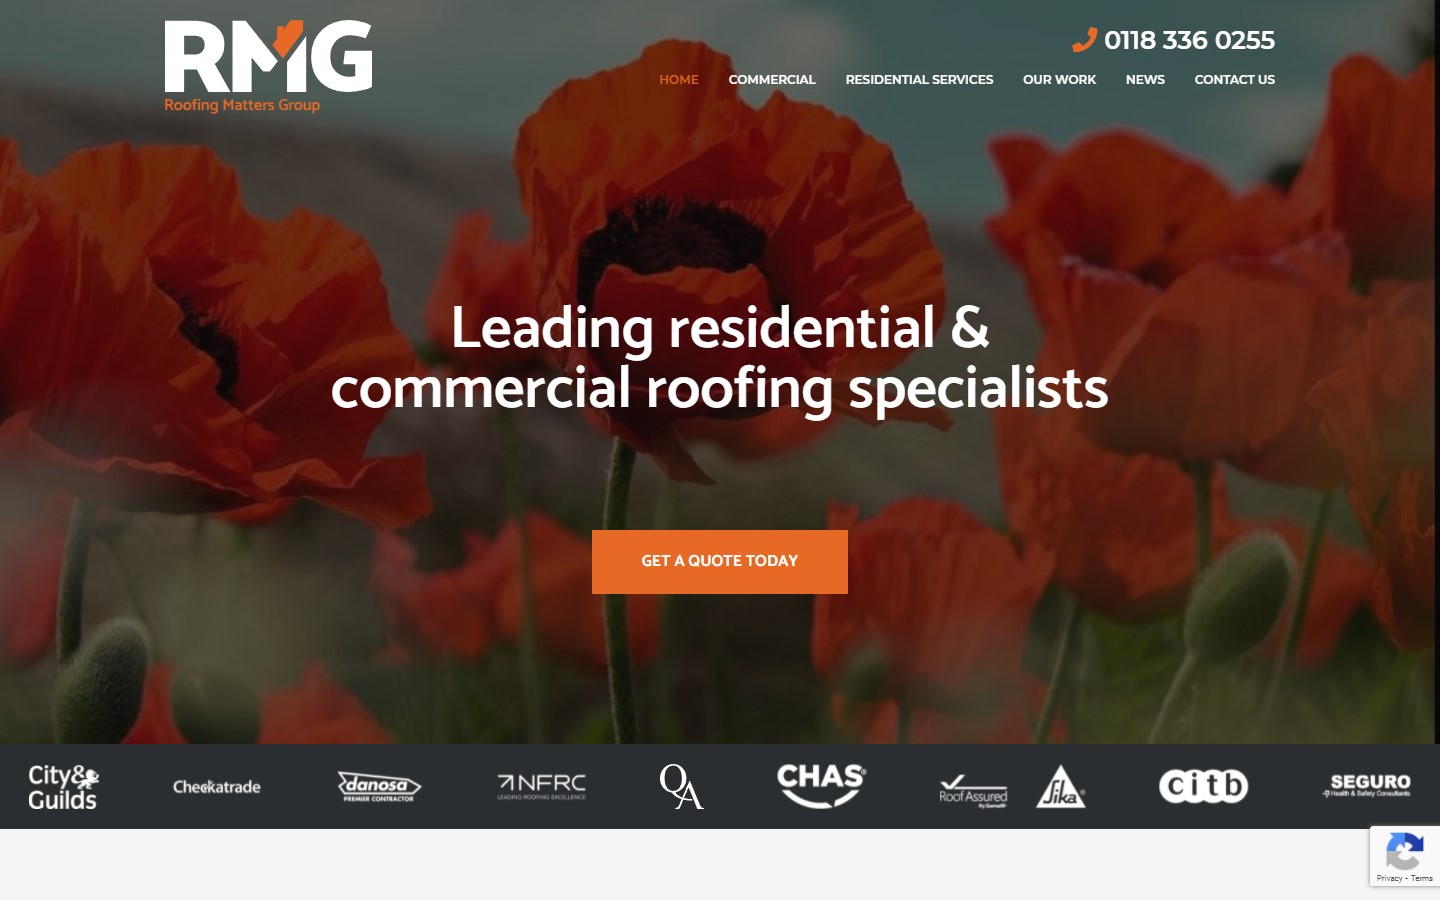 Roofing Matters Group